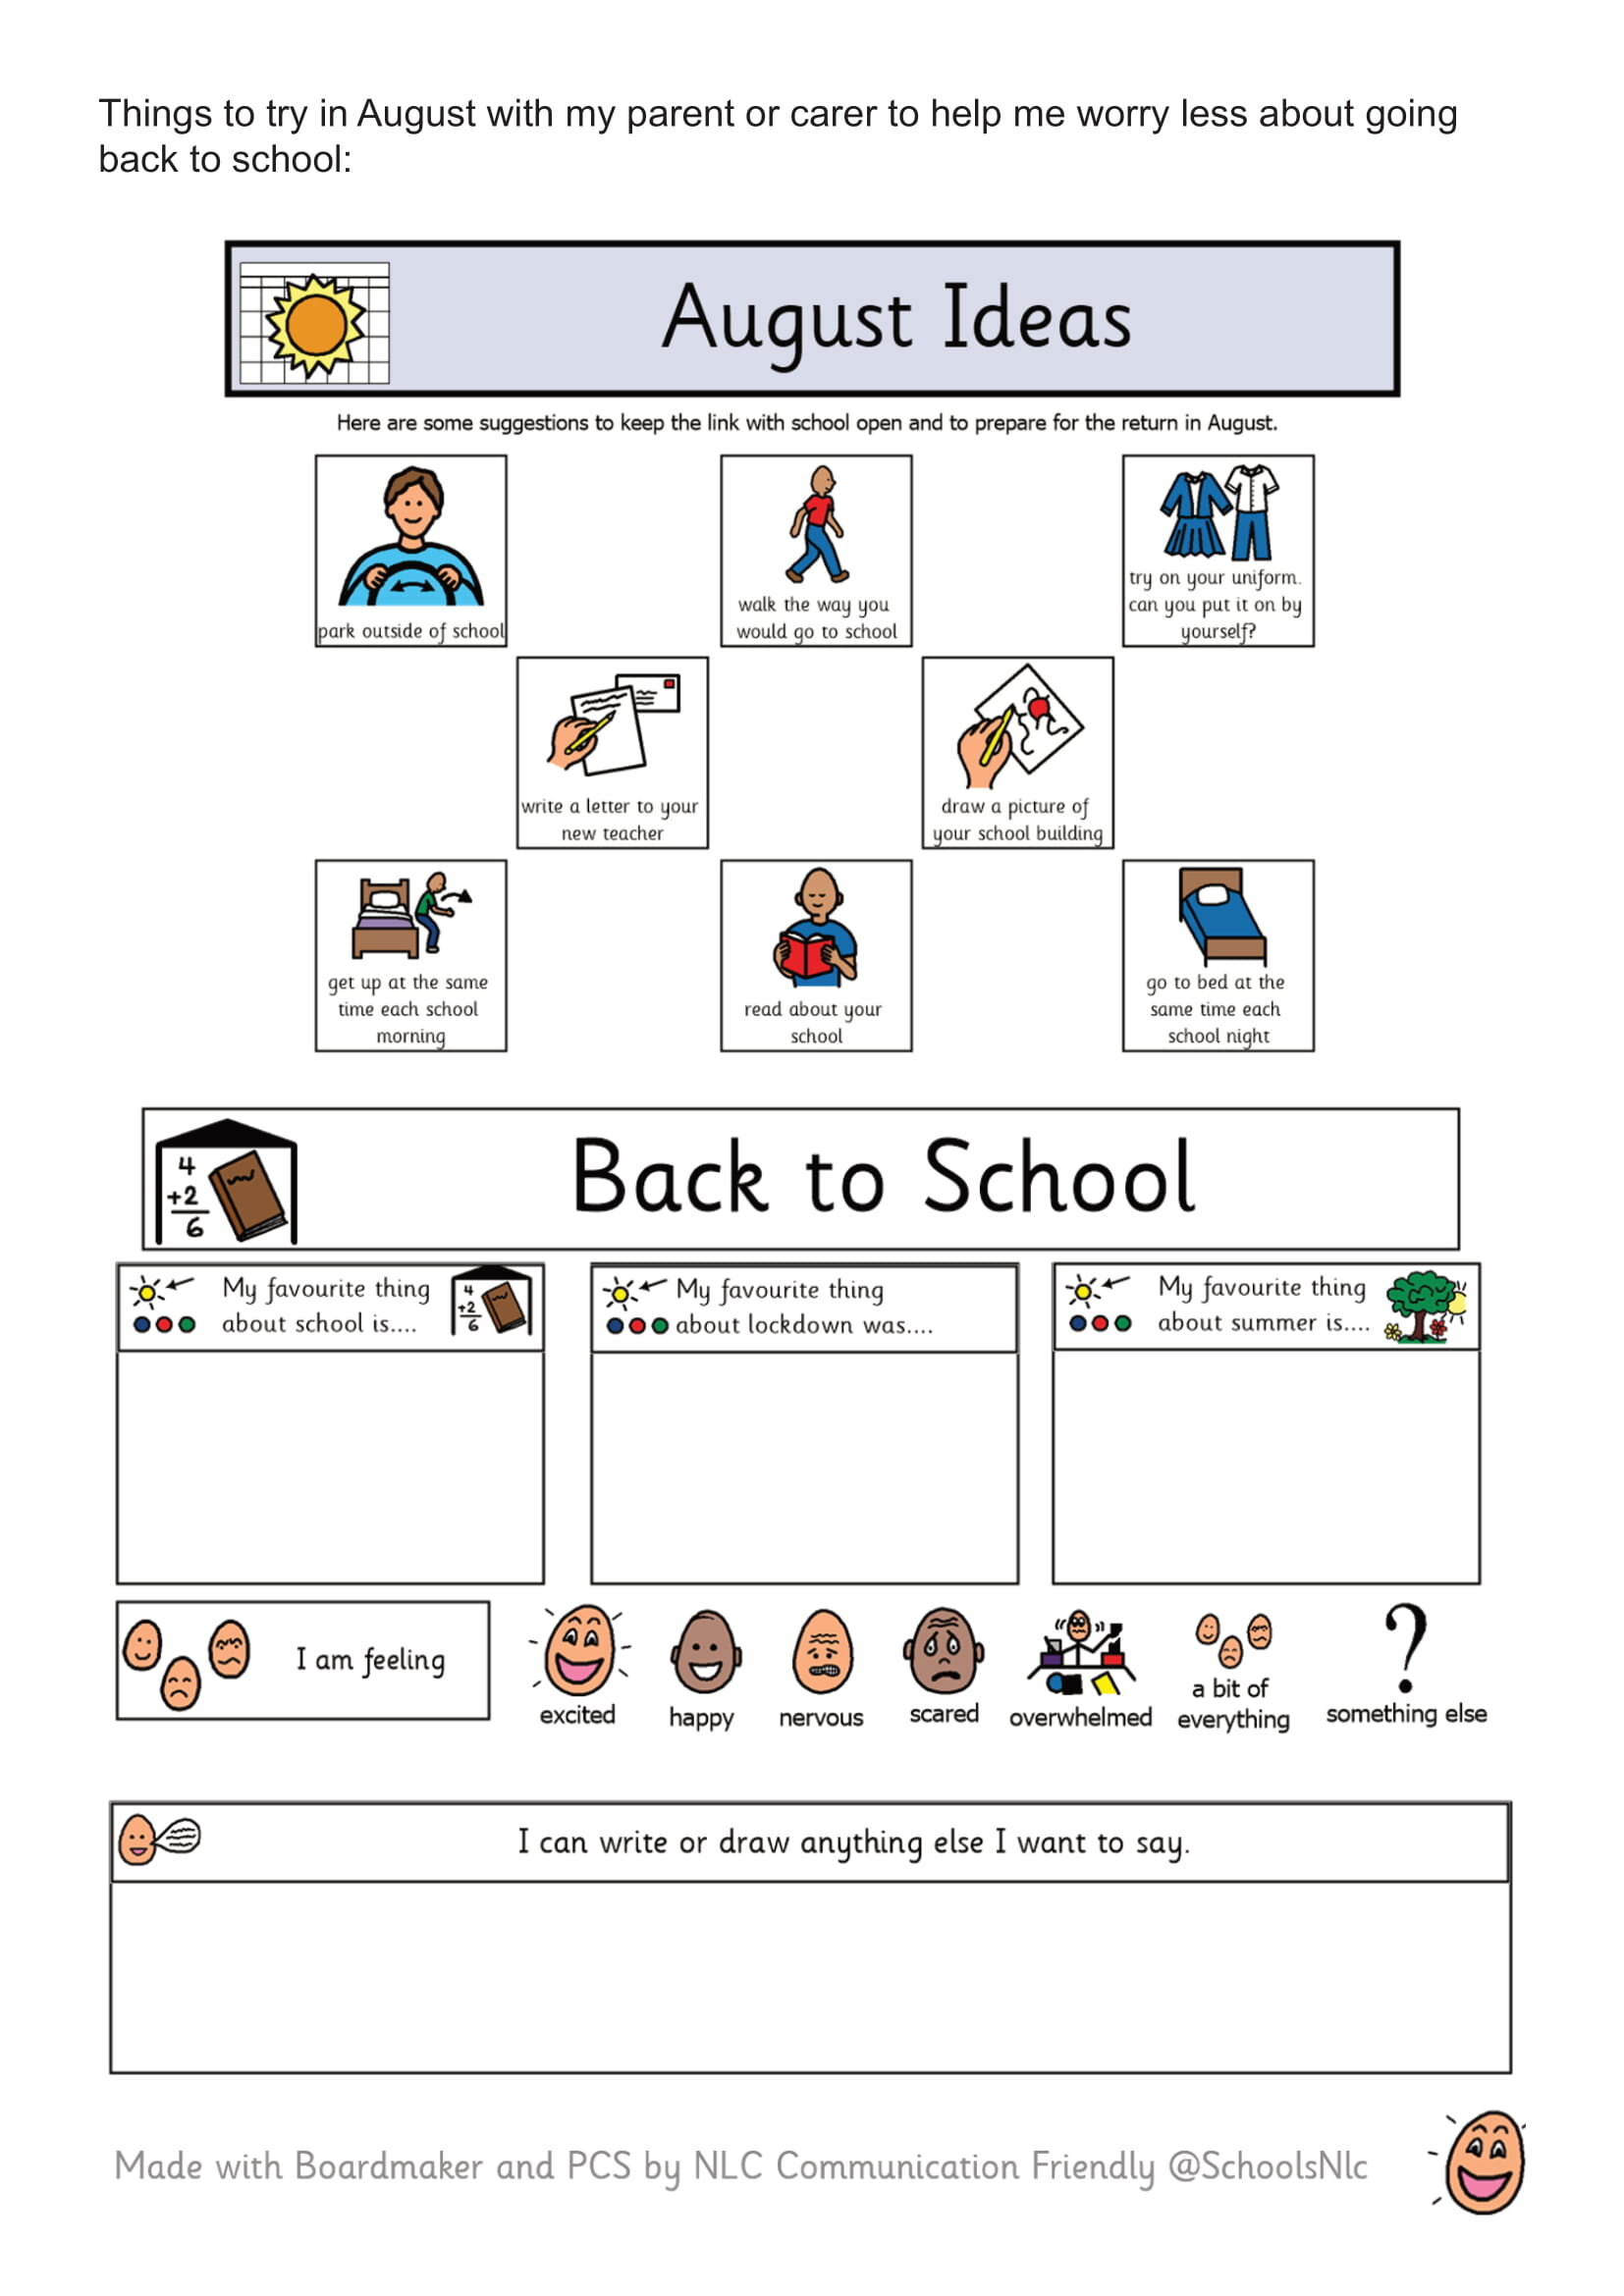 Easy Read Child Anxiety Resources V1 (002)-7.jpg